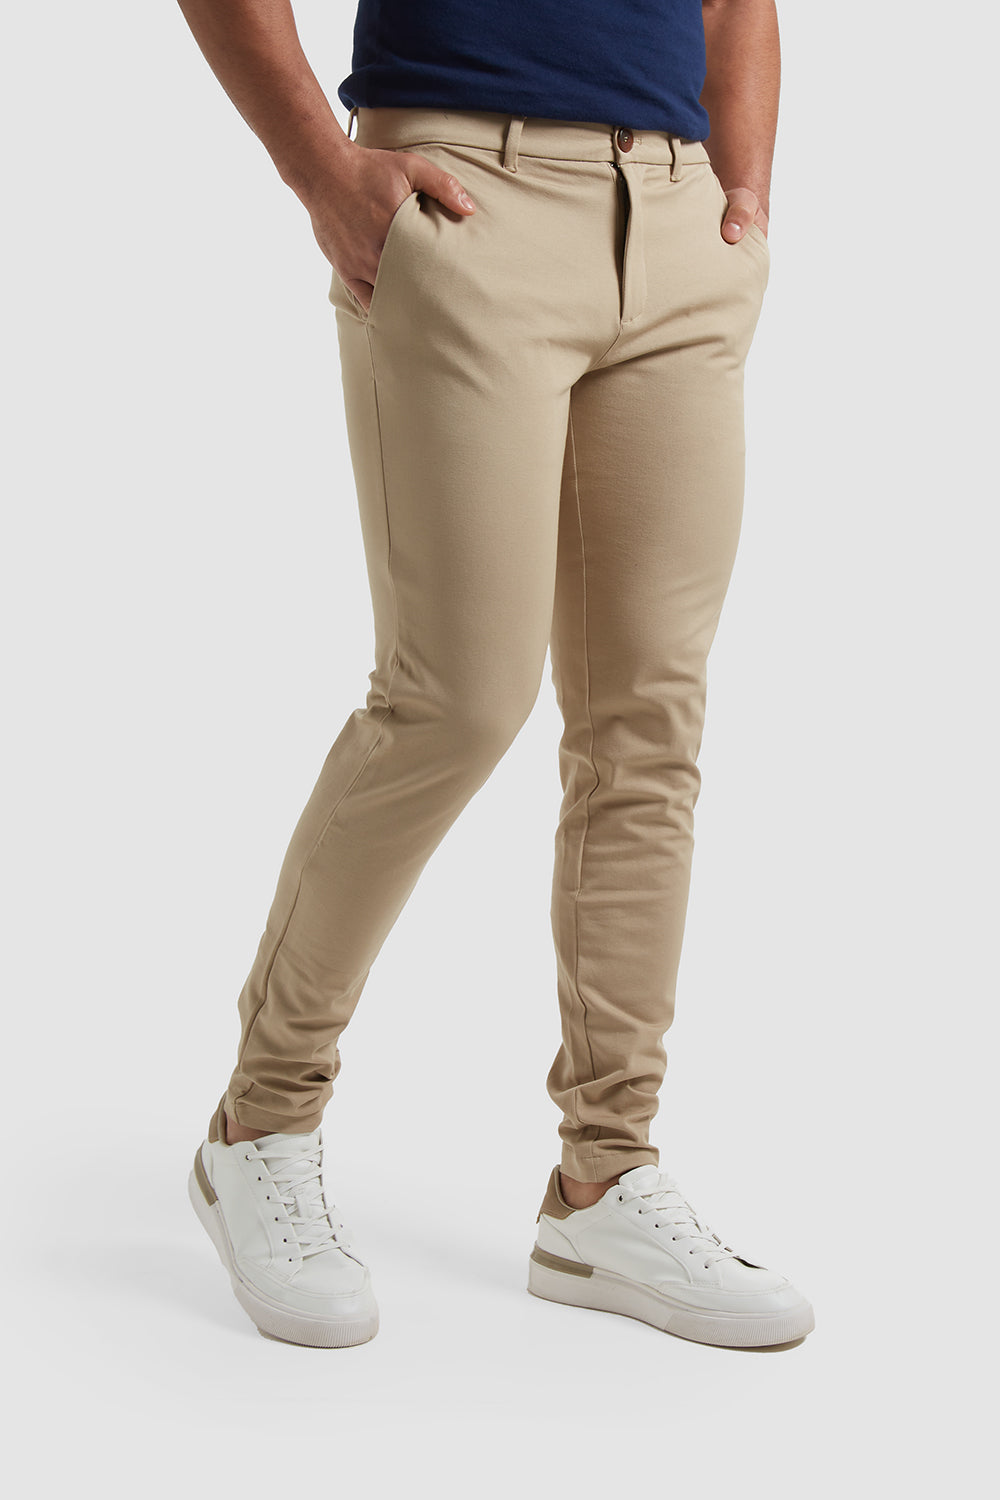 Quality Chinos Pant Trousers for Men  Lagmall Online Market Nigeria